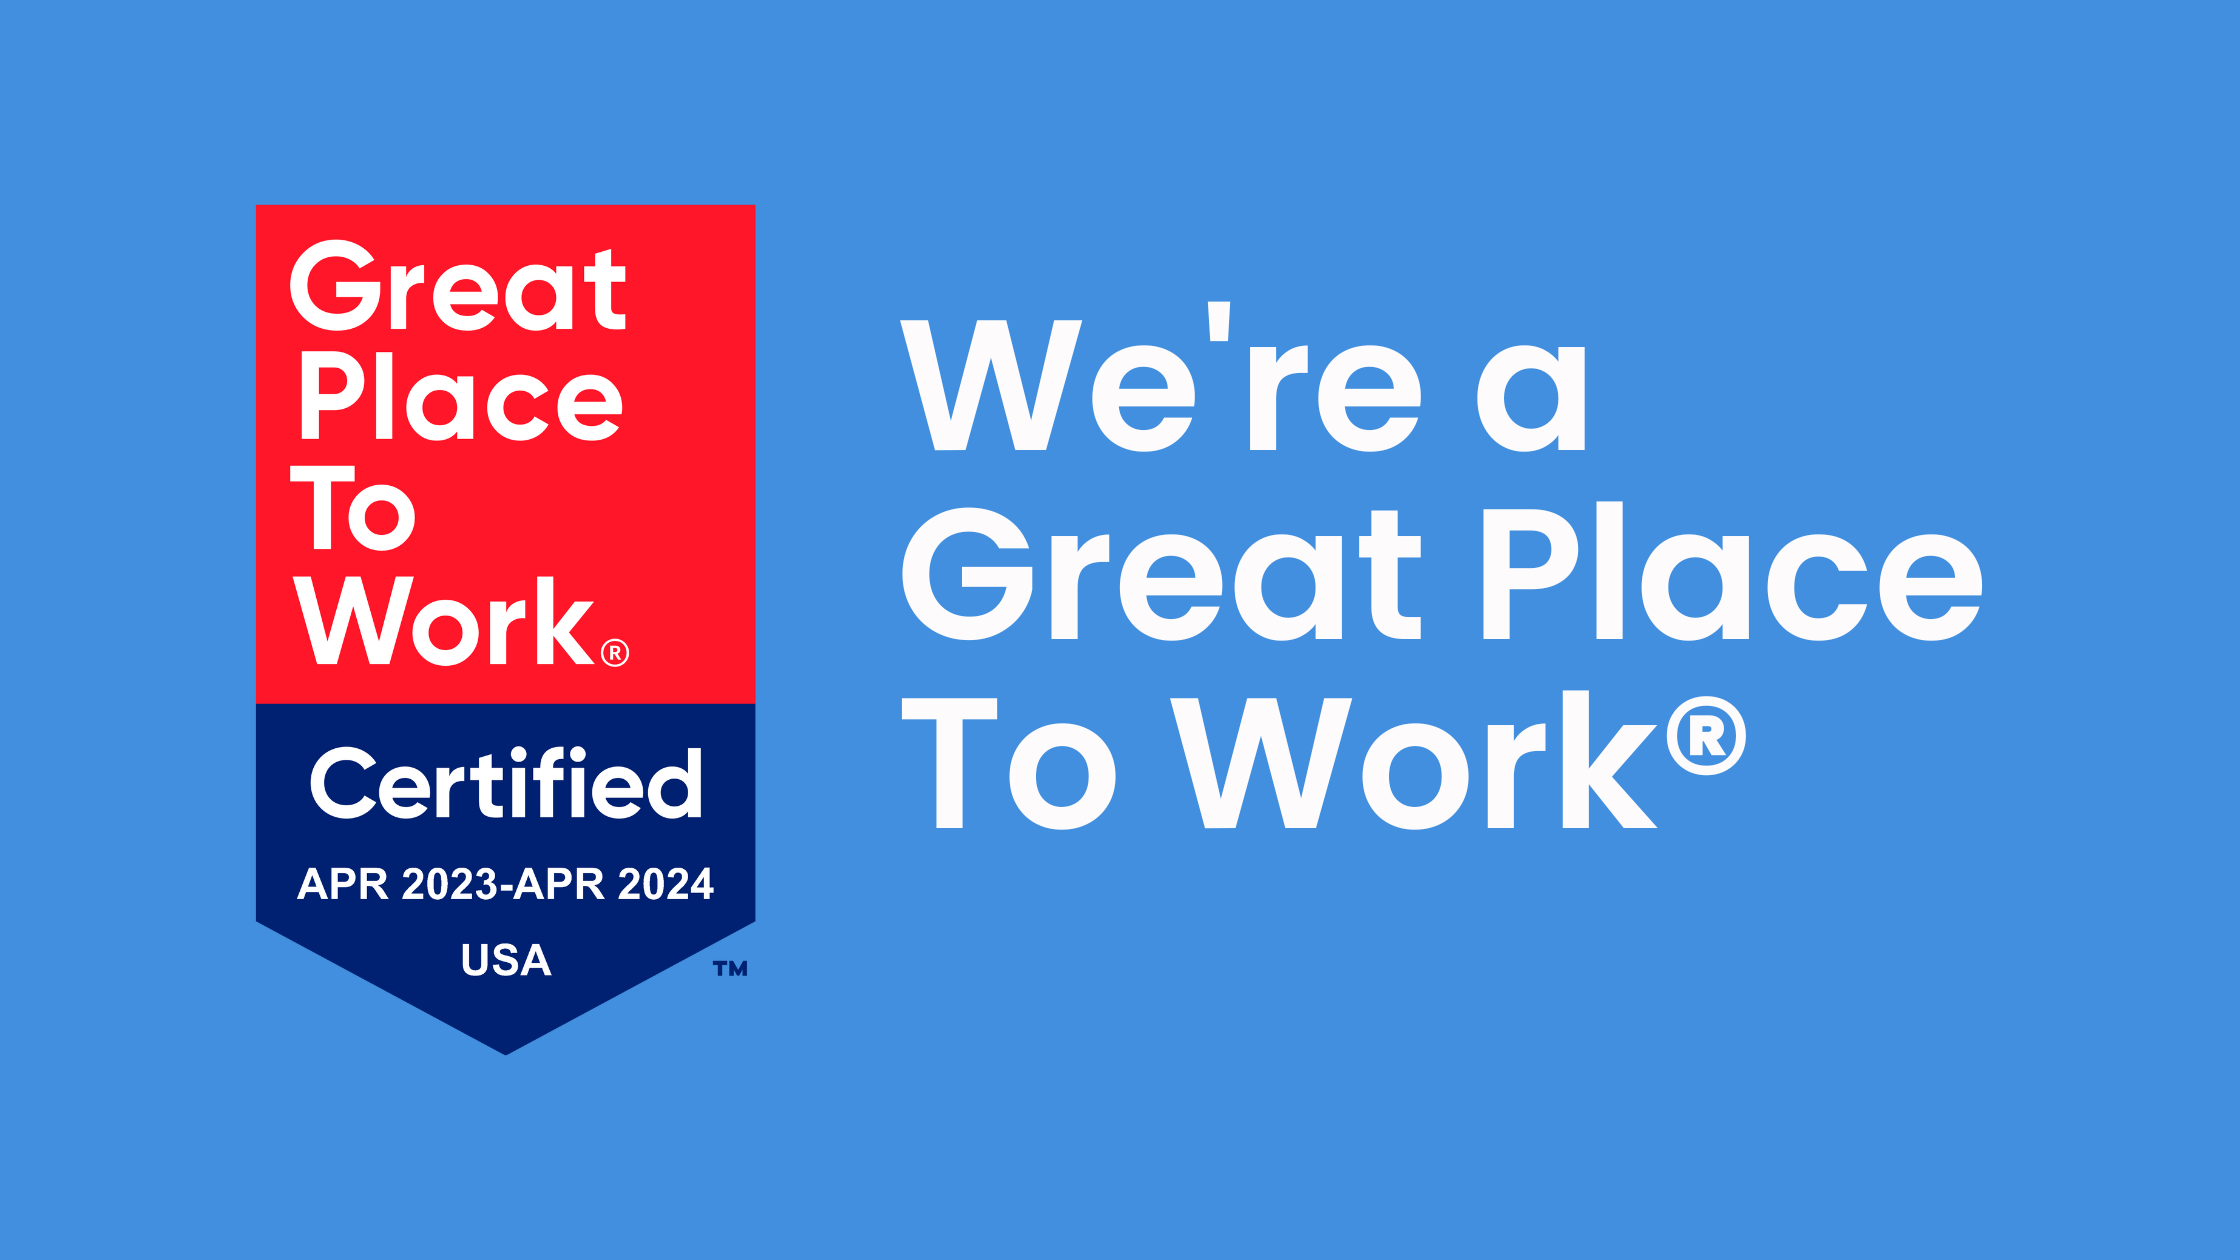 HyBridge Solutions Wins Great Place To Work Certification